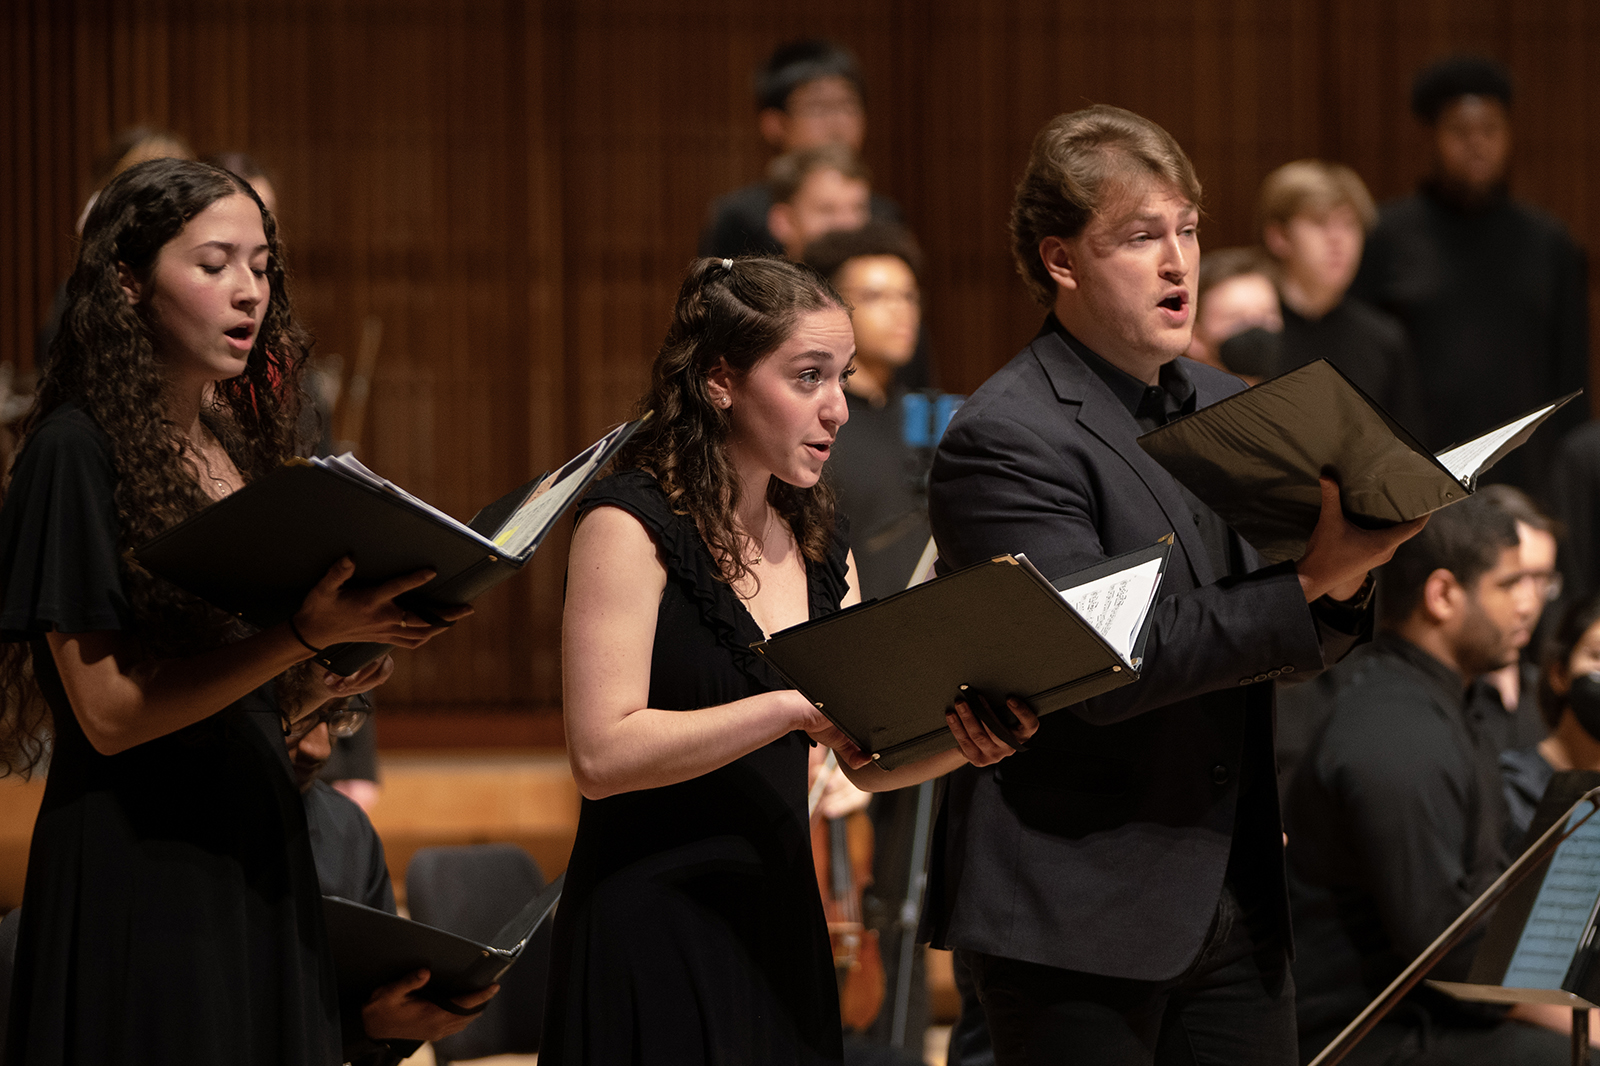 Members of the UMD Chamber Singers sing during a performance.